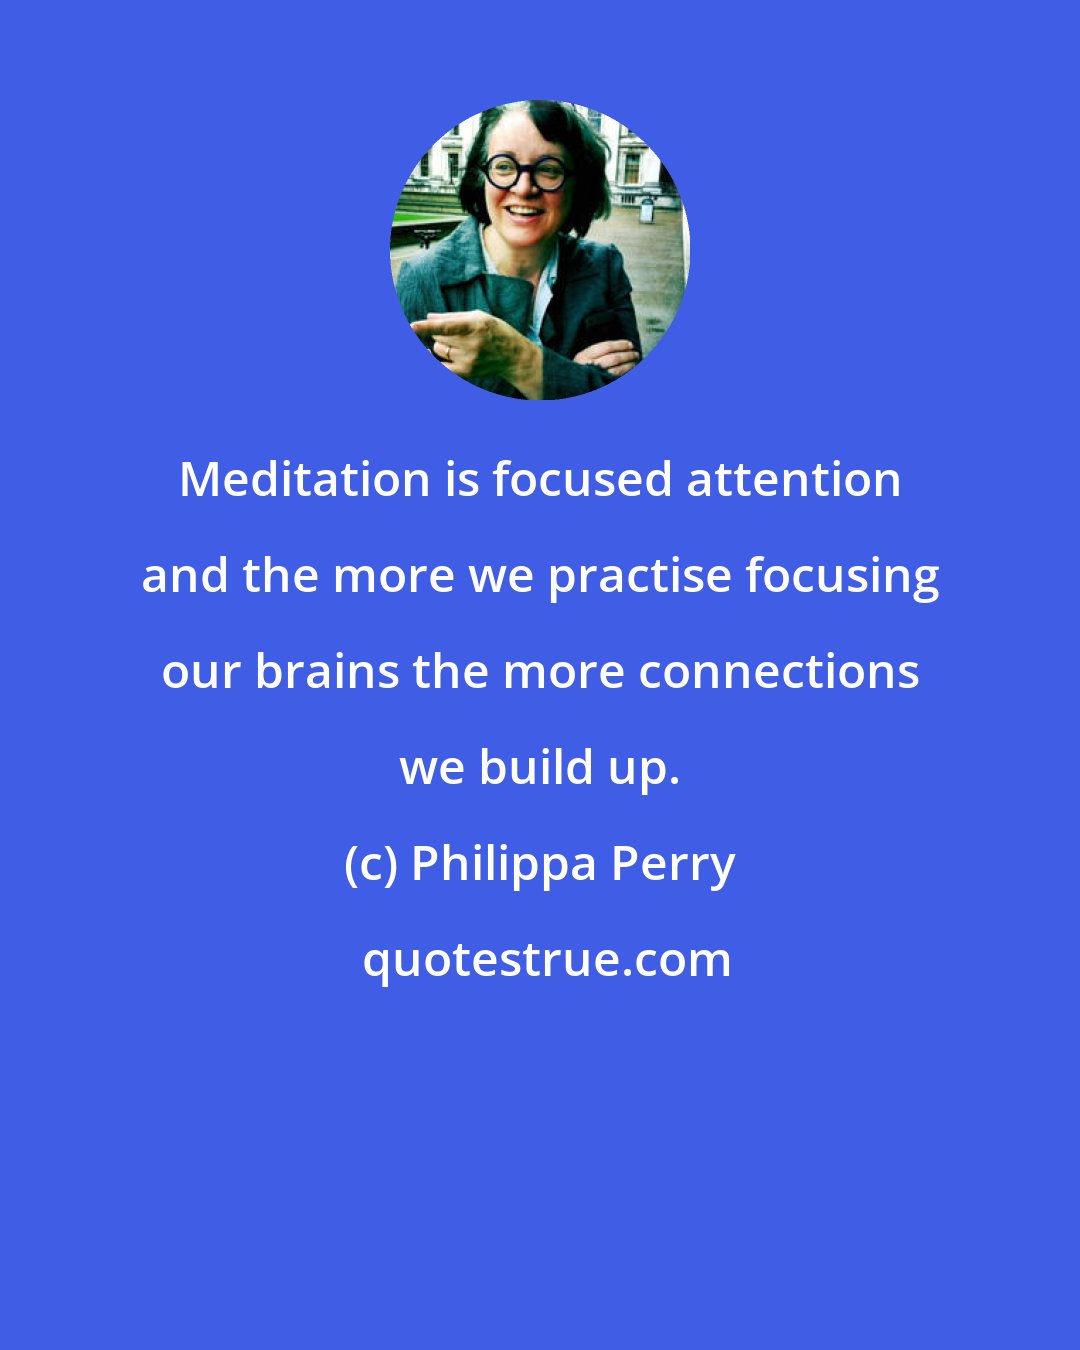 Philippa Perry: Meditation is focused attention and the more we practise focusing our brains the more connections we build up.